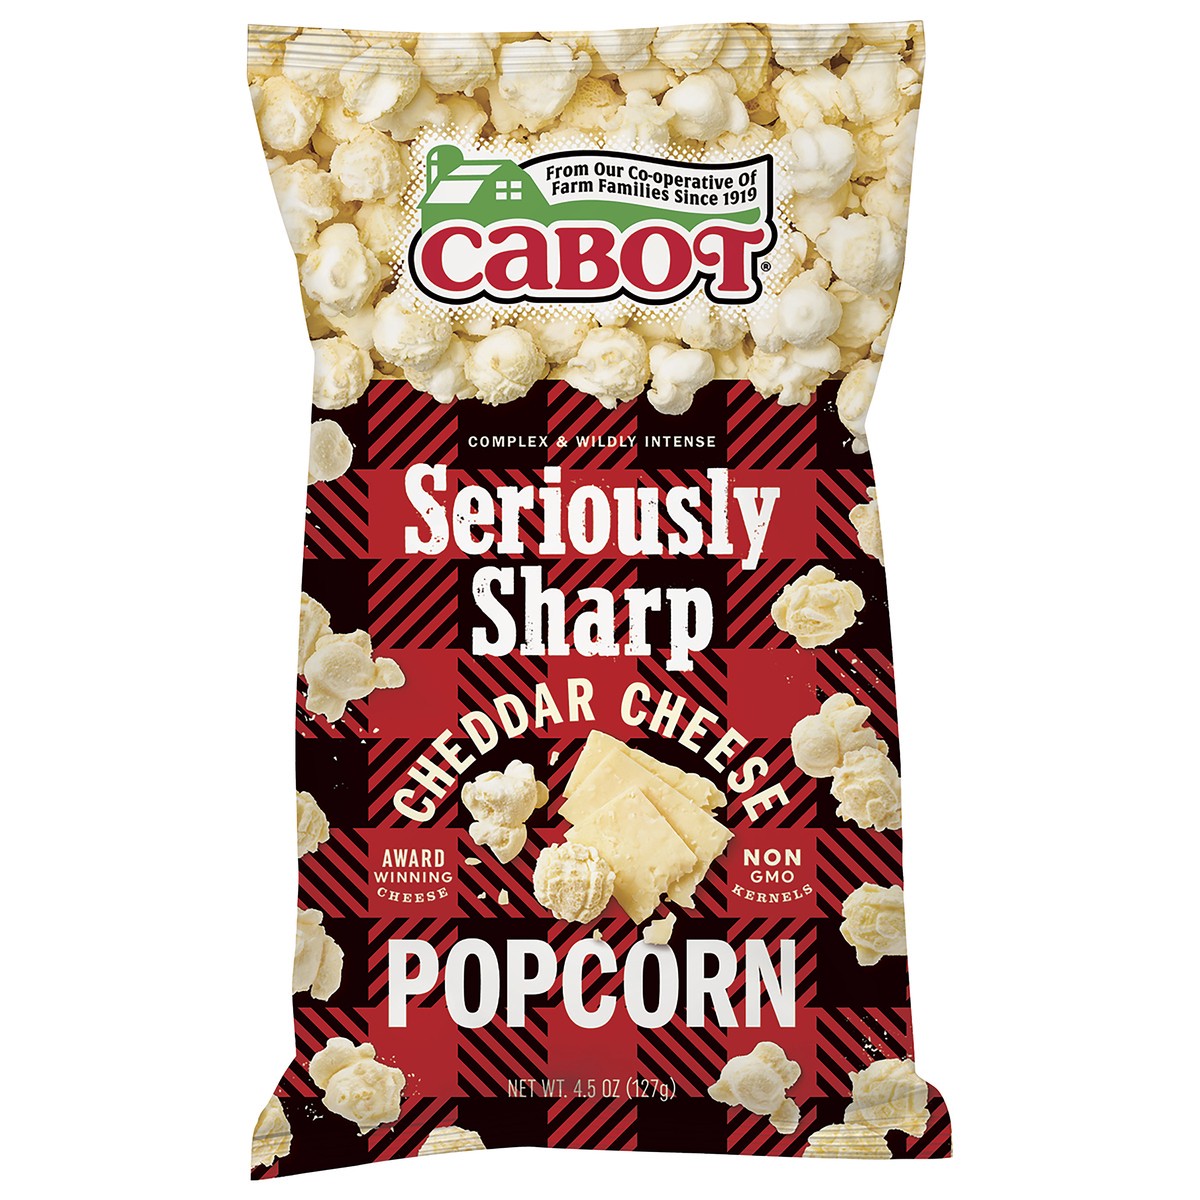 slide 1 of 3, Cabot, Seriously Sharp Cheddar Cheese Popcorn, 4.5 Oz, 1 ct